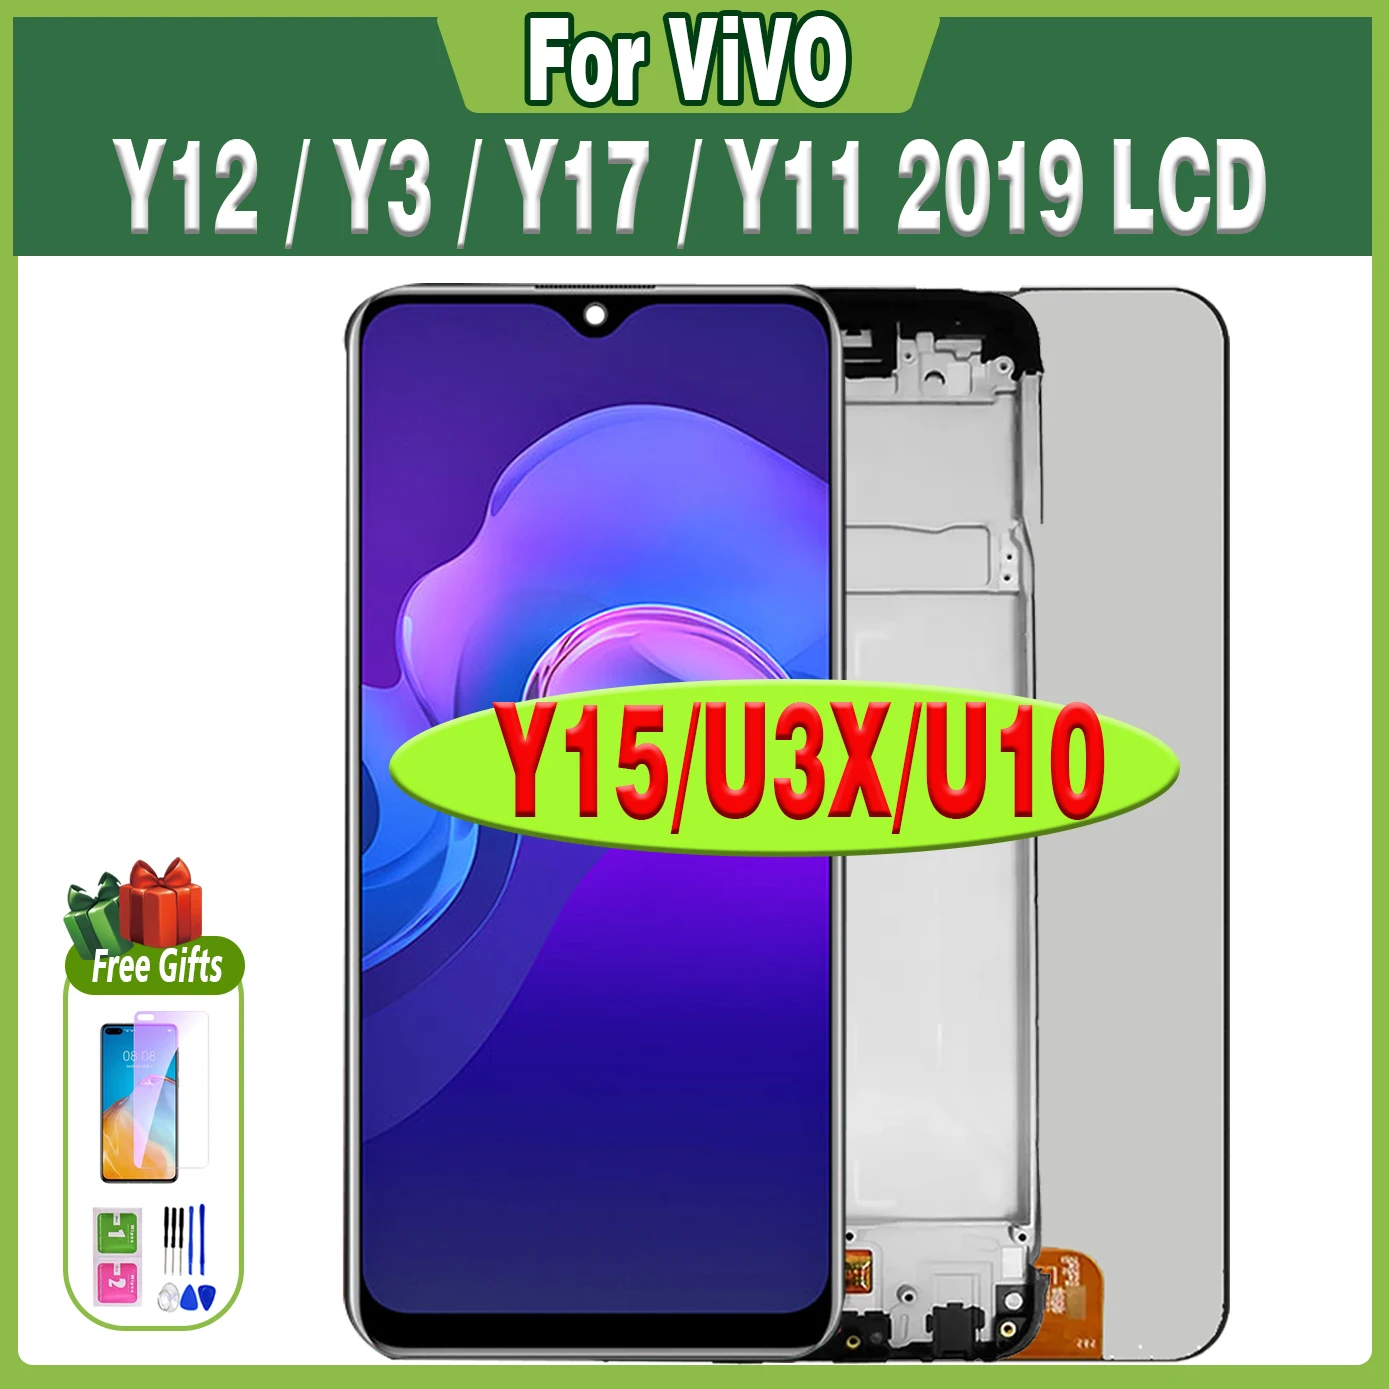 

6.35" Display for Vivo Y11 2019/Y15/U3X/U10 Lcd For Vivo Y12/Y3/Y17 LCD Touch Screen Panel Digitizer Assembly Replacement Repair